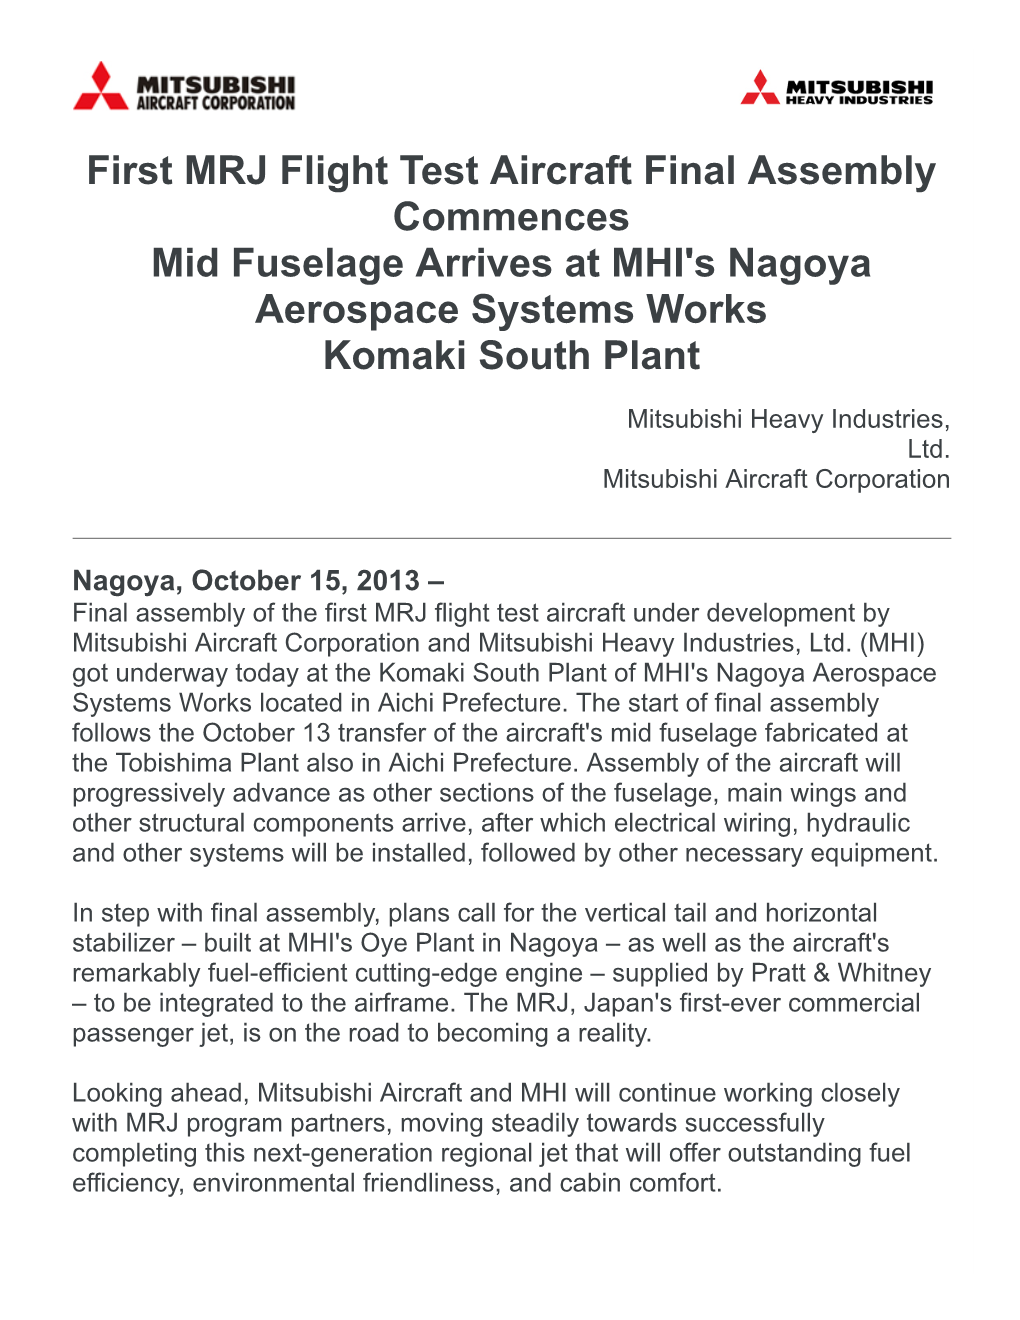 First MRJ Flight Test Aircraft Final Assembly Commences Mid Fuselage Arrives at MHI's Nagoya Aerospace Systems Works Komaki South Plant